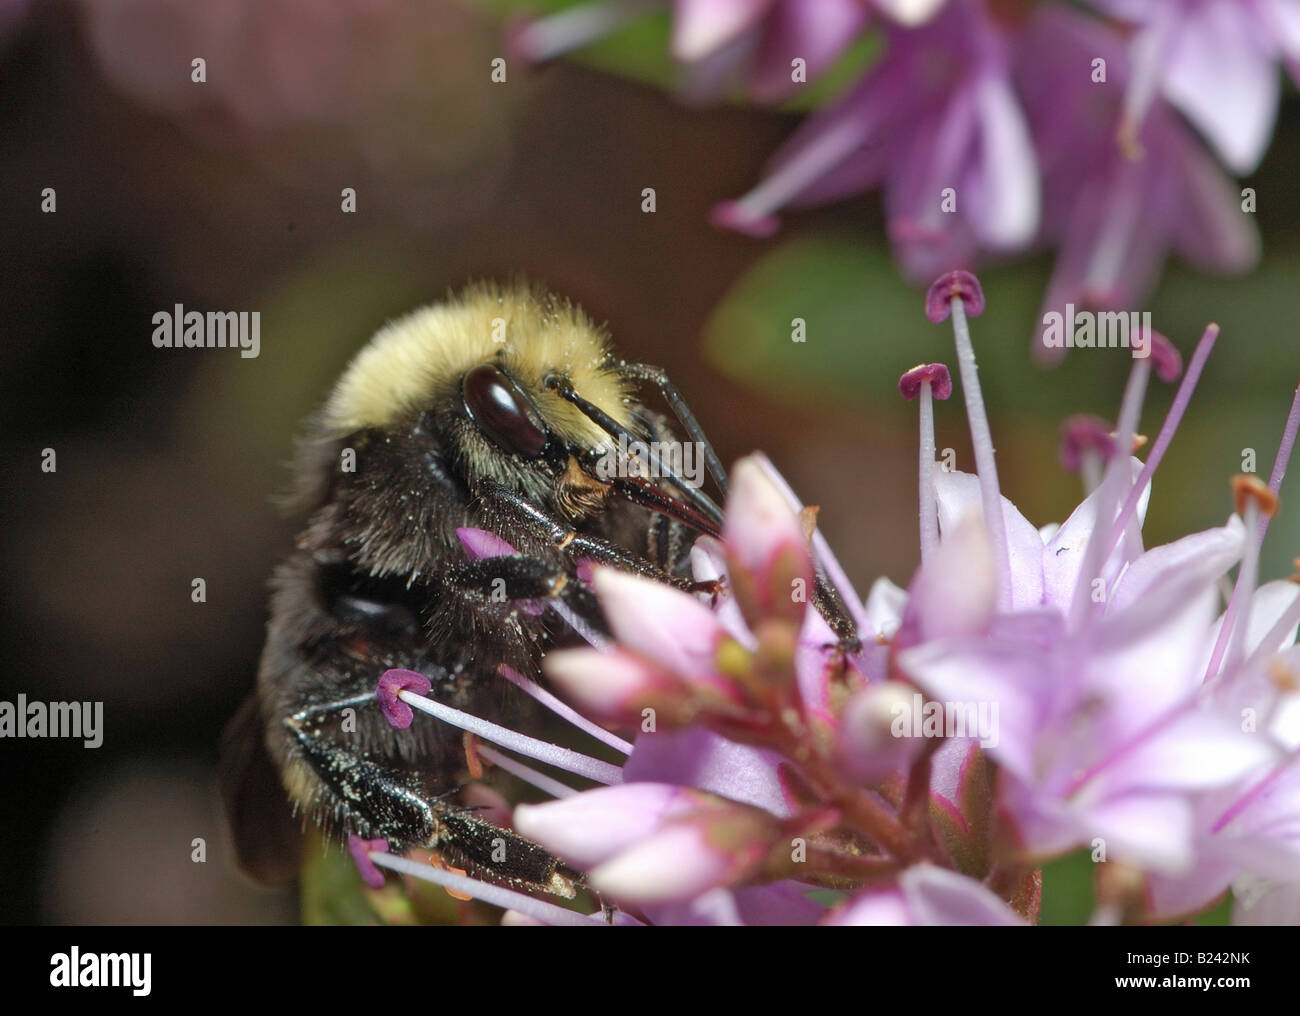 Bumblebee is gathering nectar on lilac flowers in Golden Gate Park San Francisco California It s fur is sprinkled with pollen Stock Photo